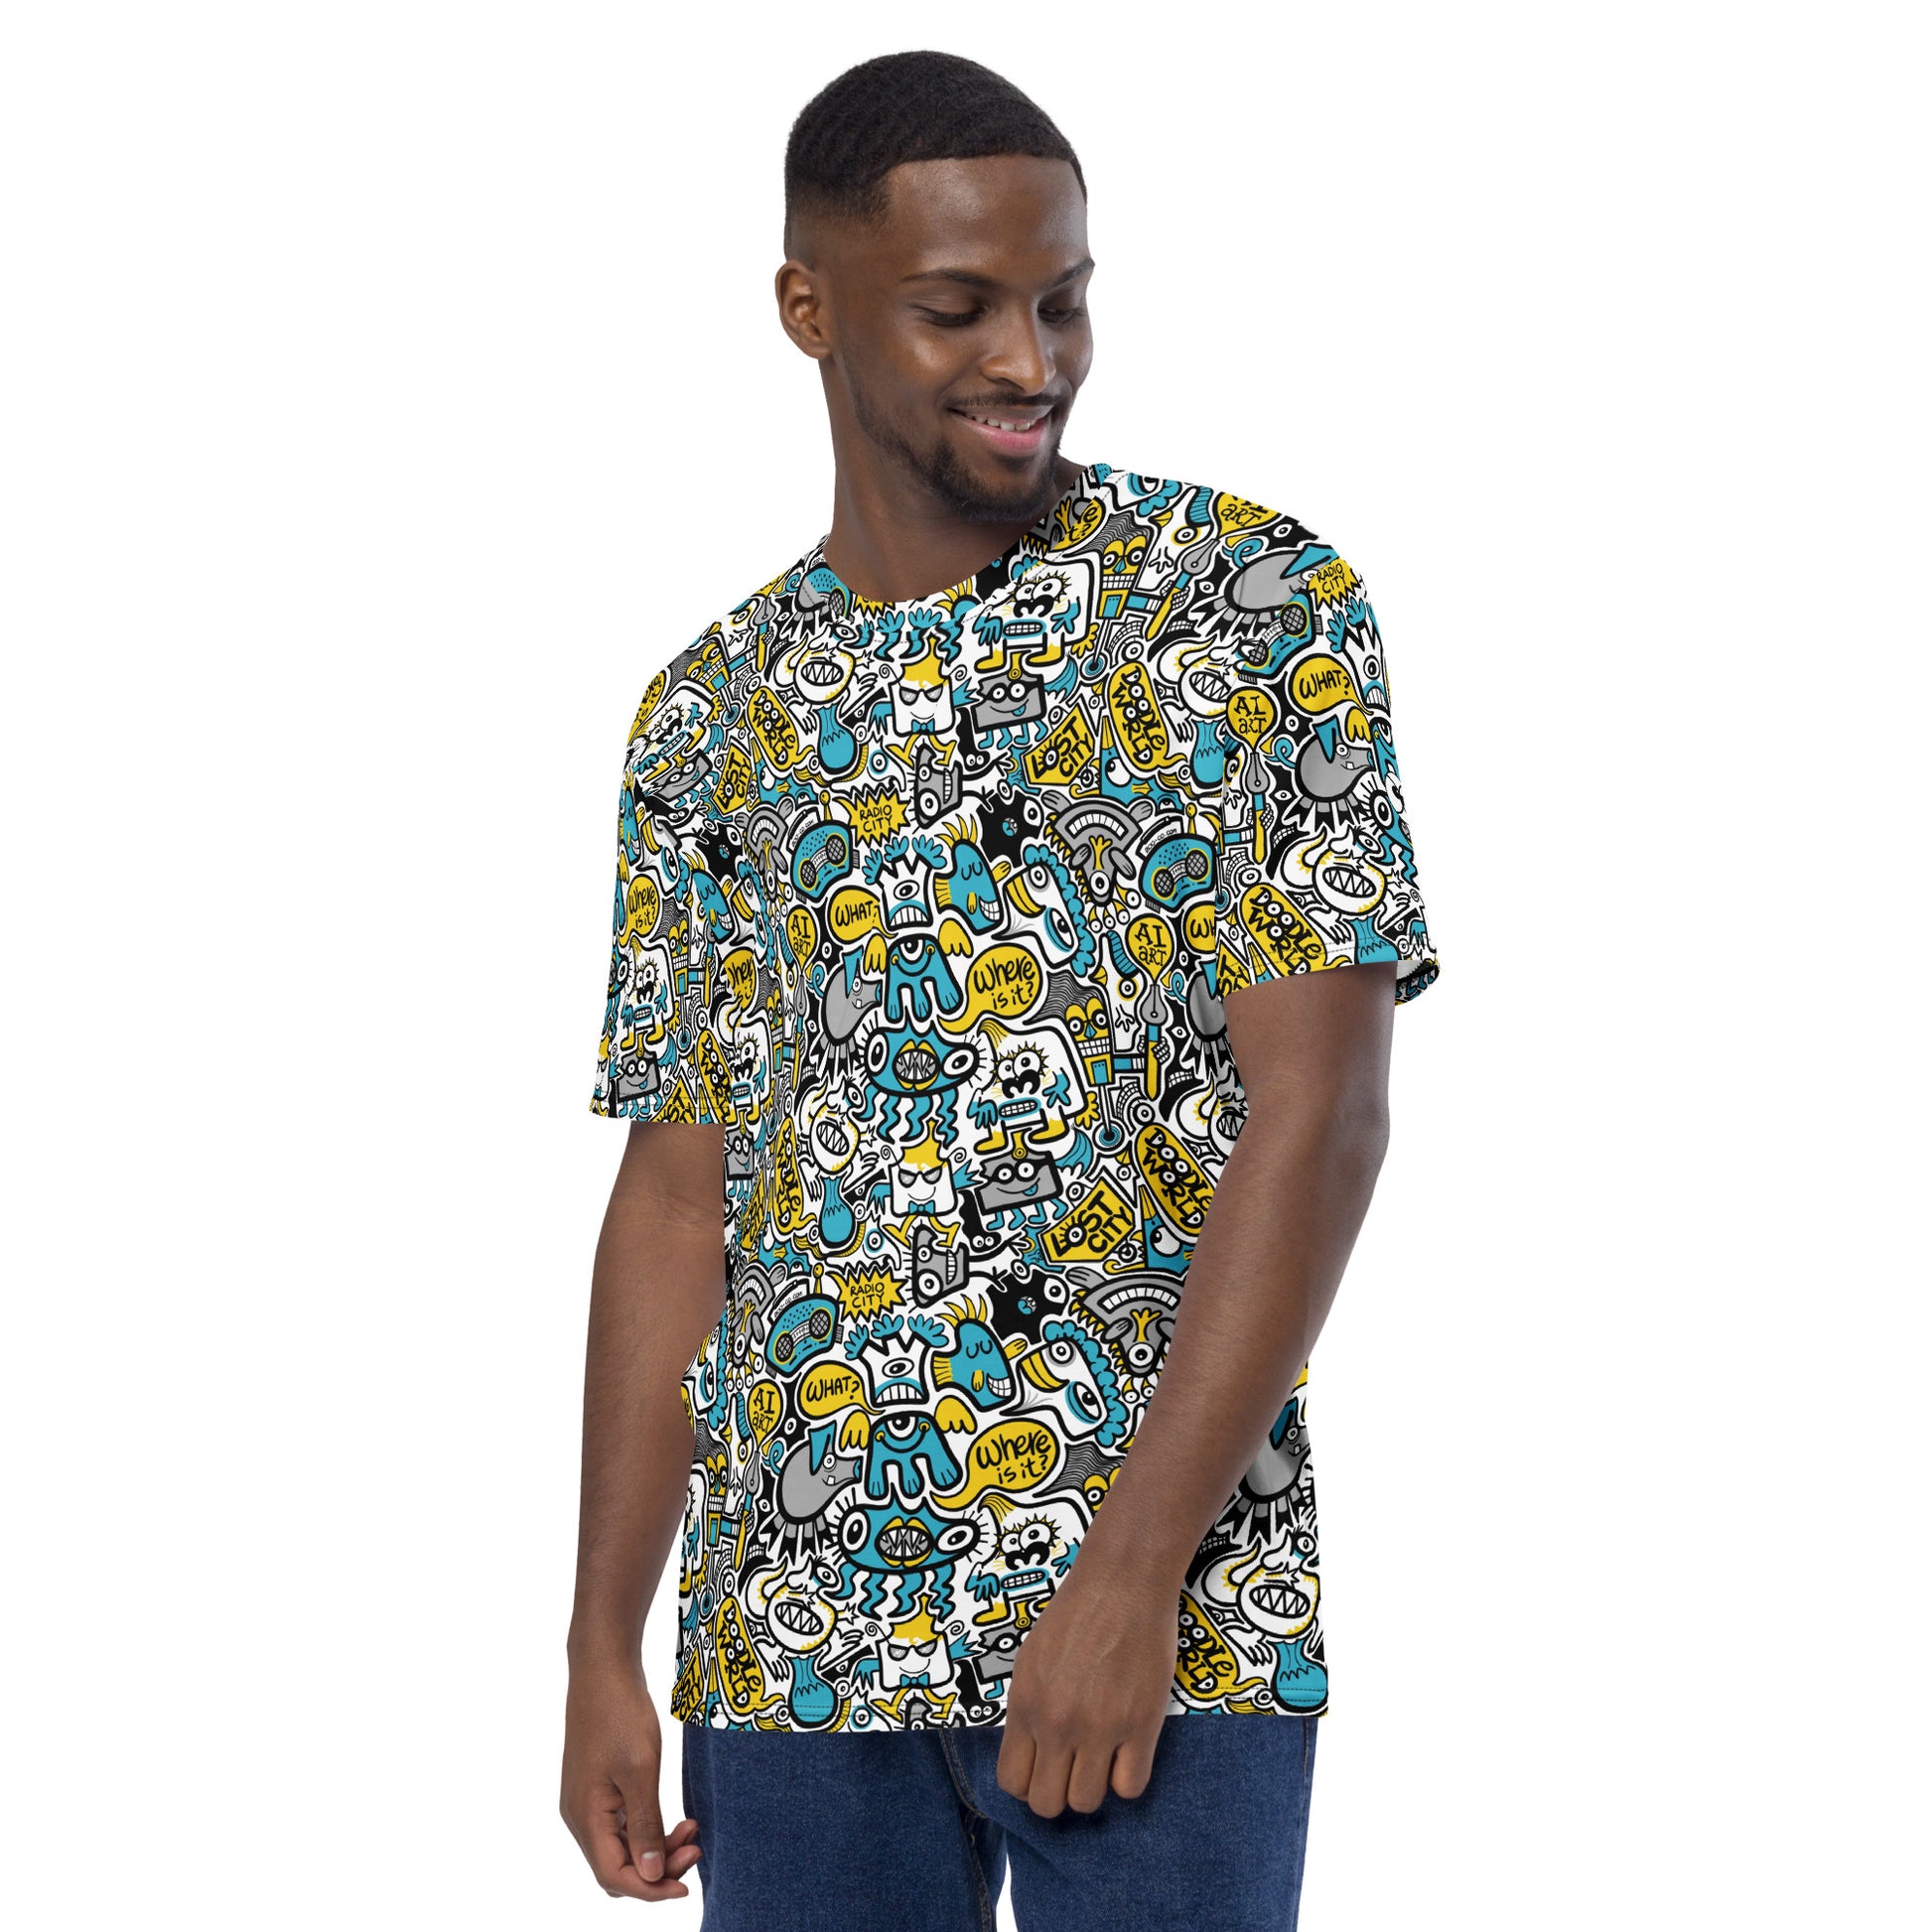 Discover a whole Doodle world in Lost city All-over print Men's t-shirt. Side view